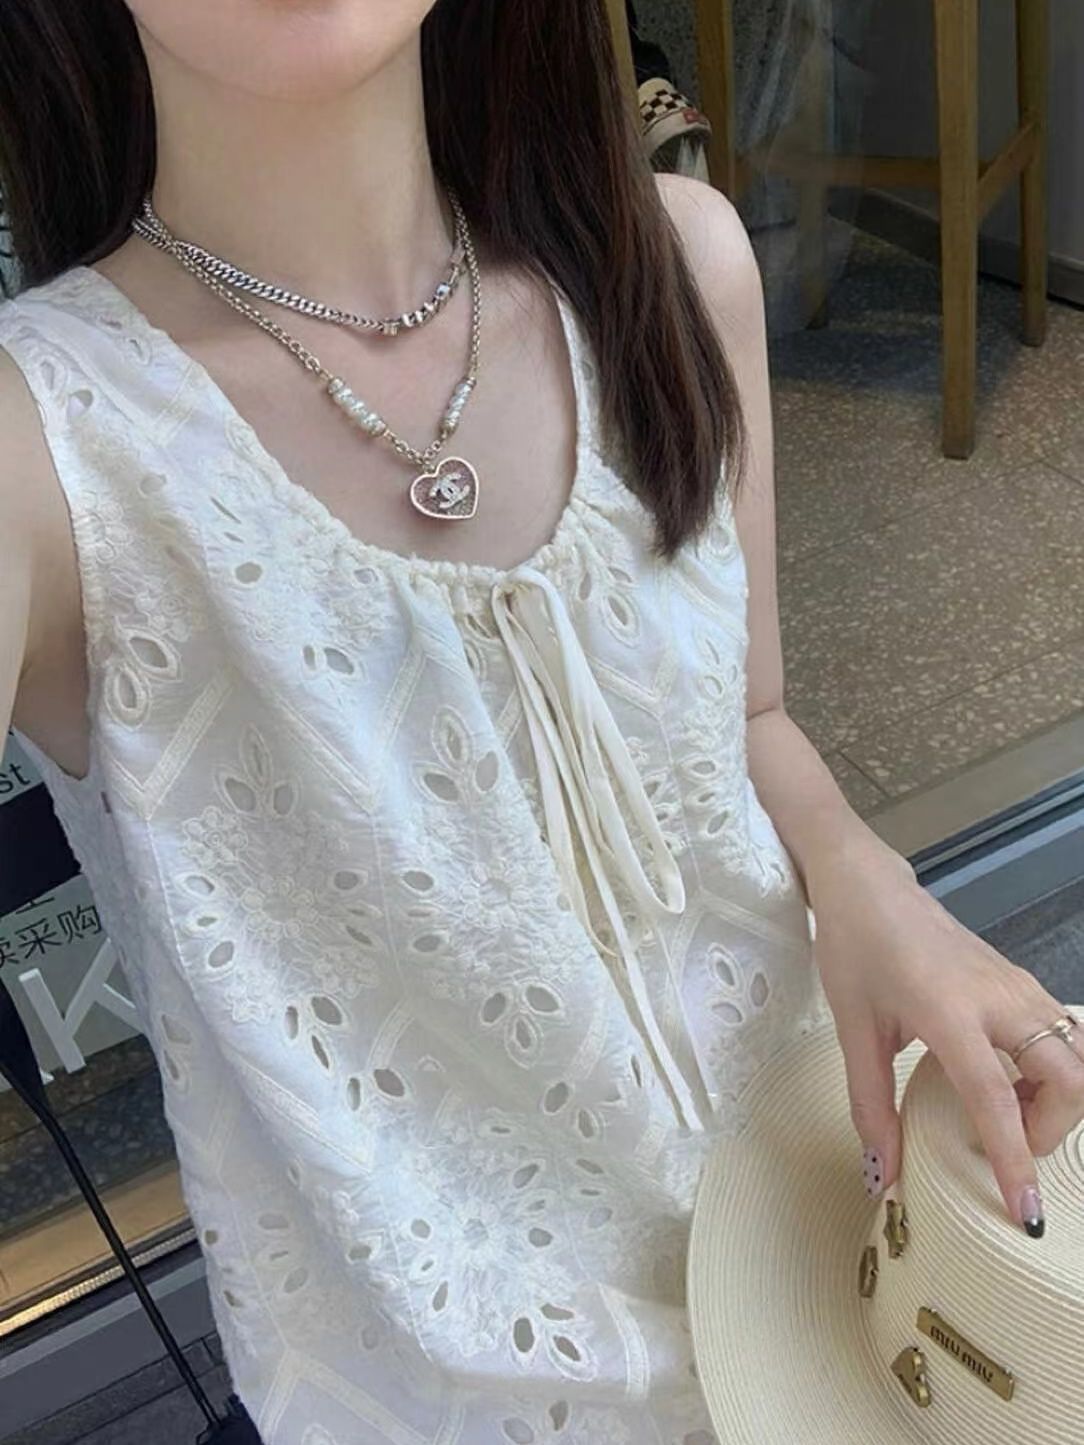 Round neck tied embroidered sleeveless dress loose temperament fresh travel style artistic style Korean style long dress